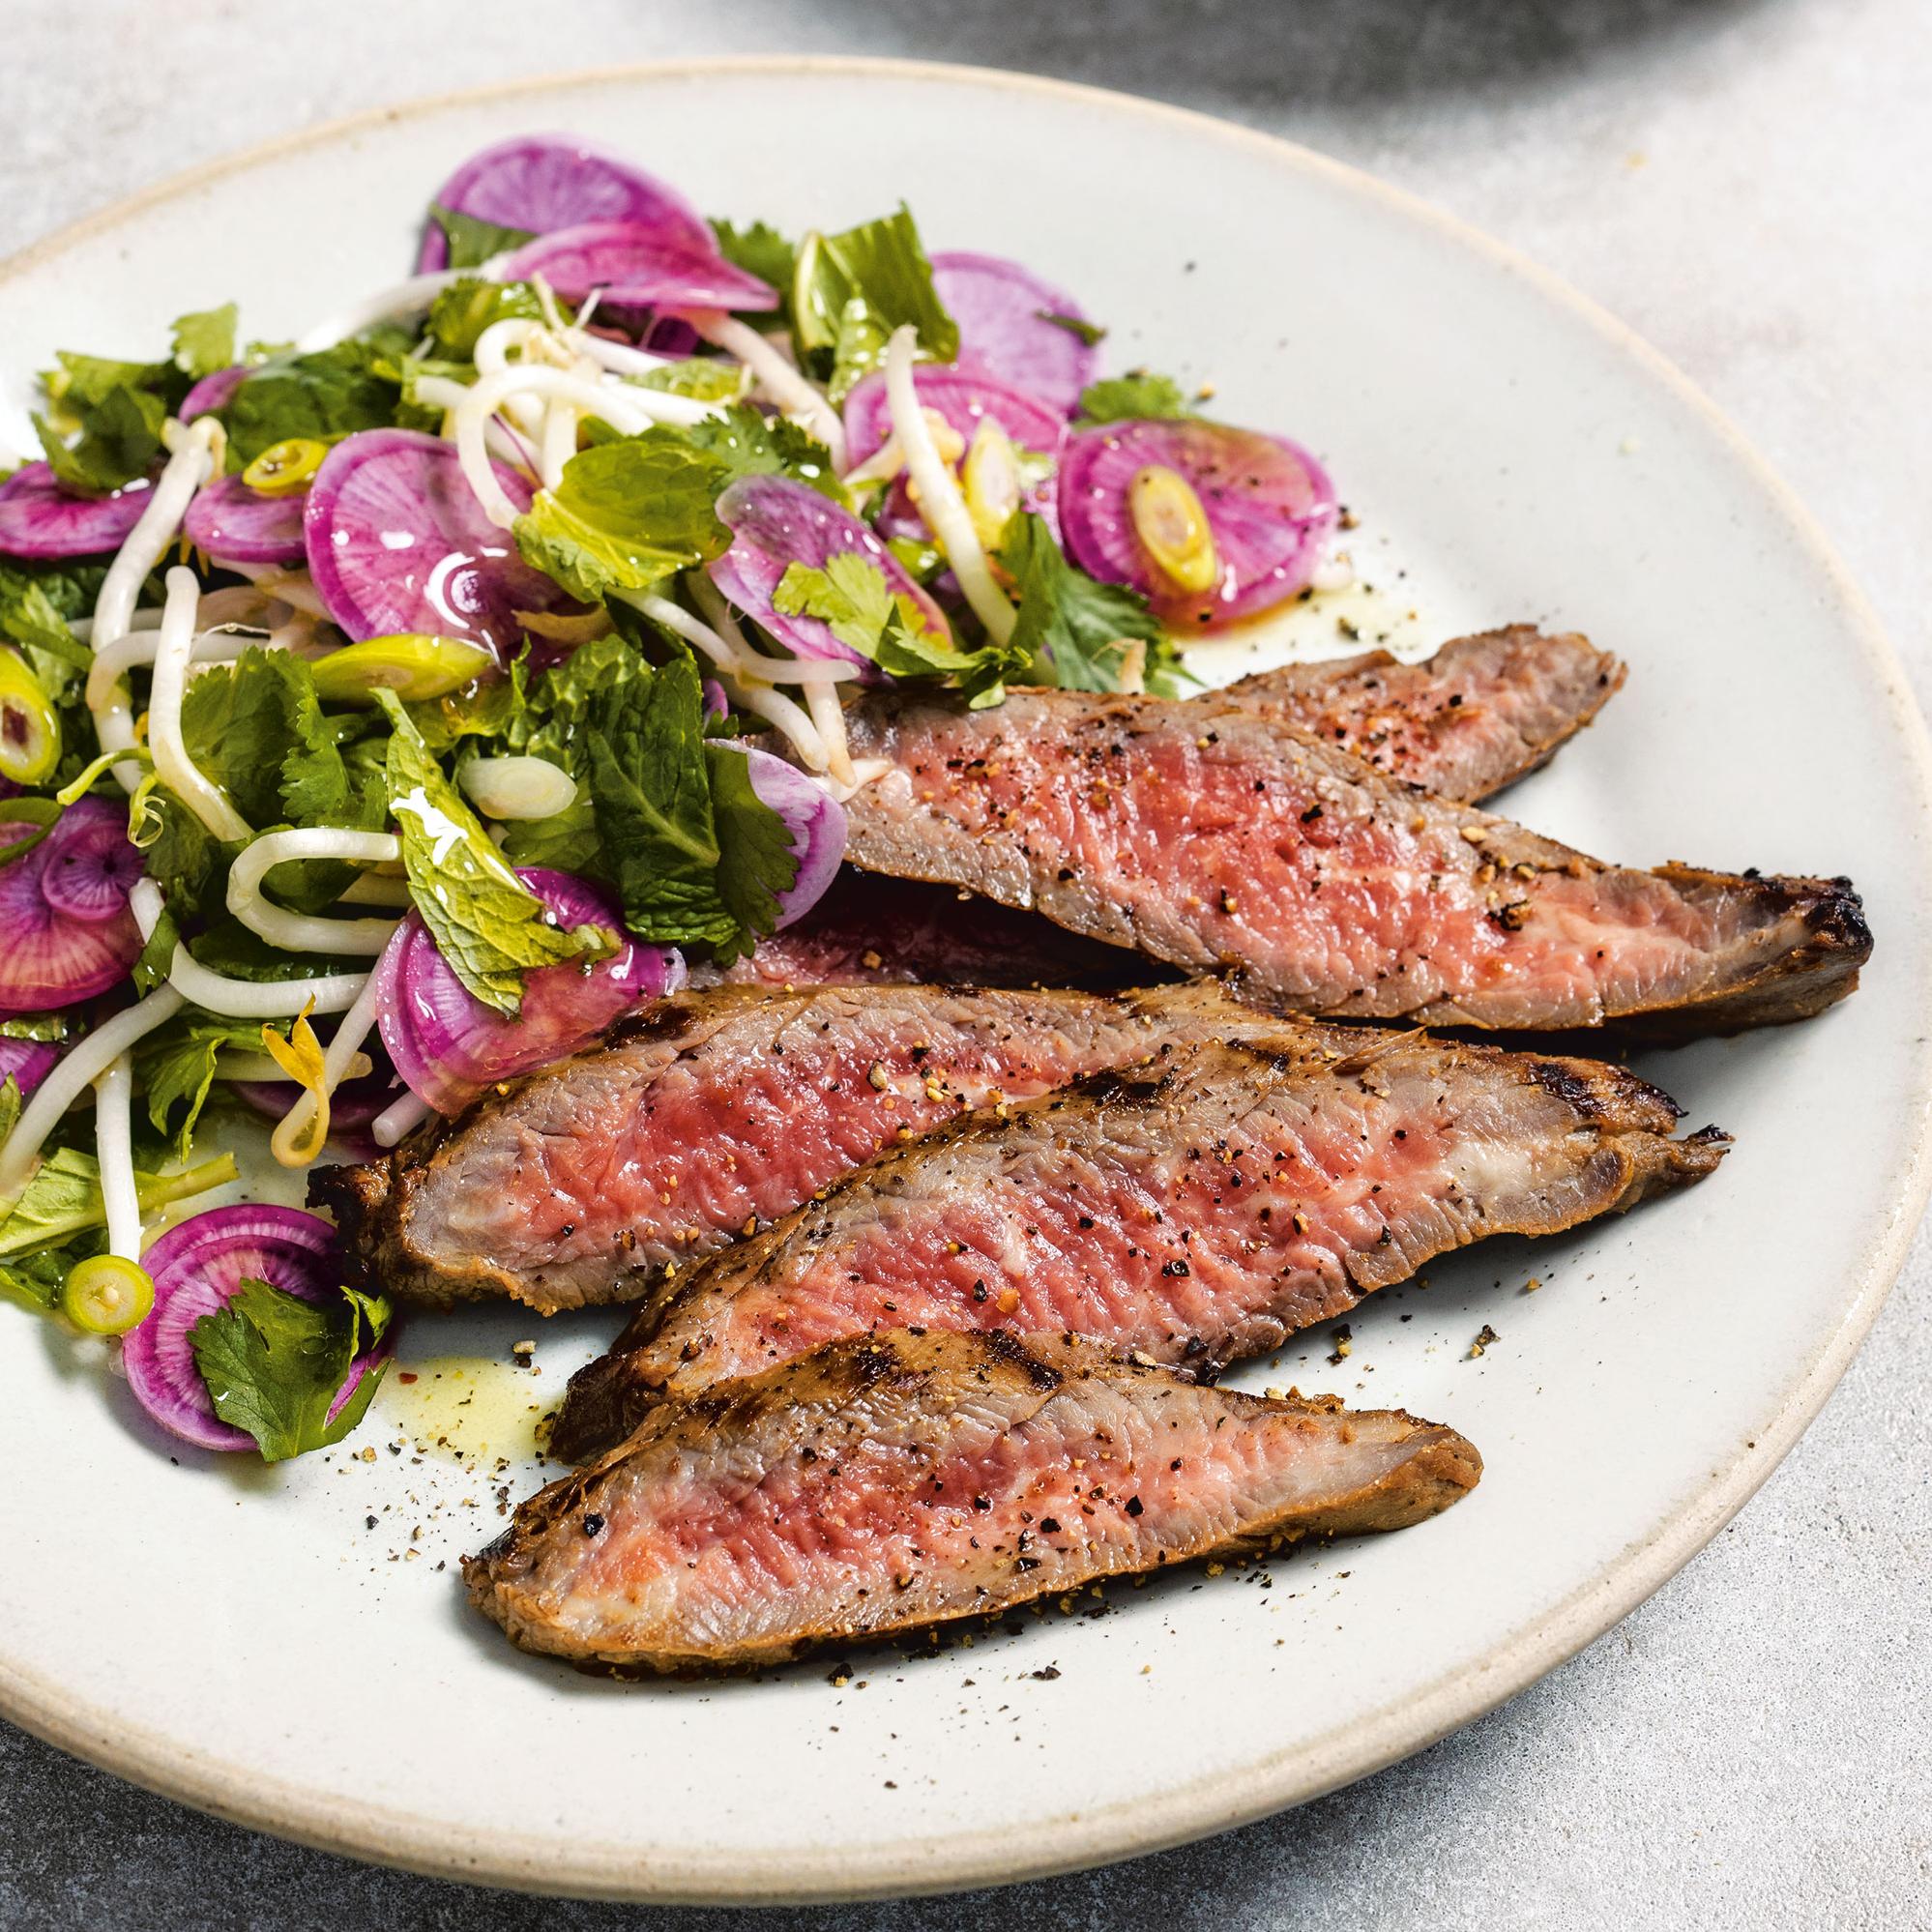  The grilled steak adds the perfect touch of smokiness to the salad.